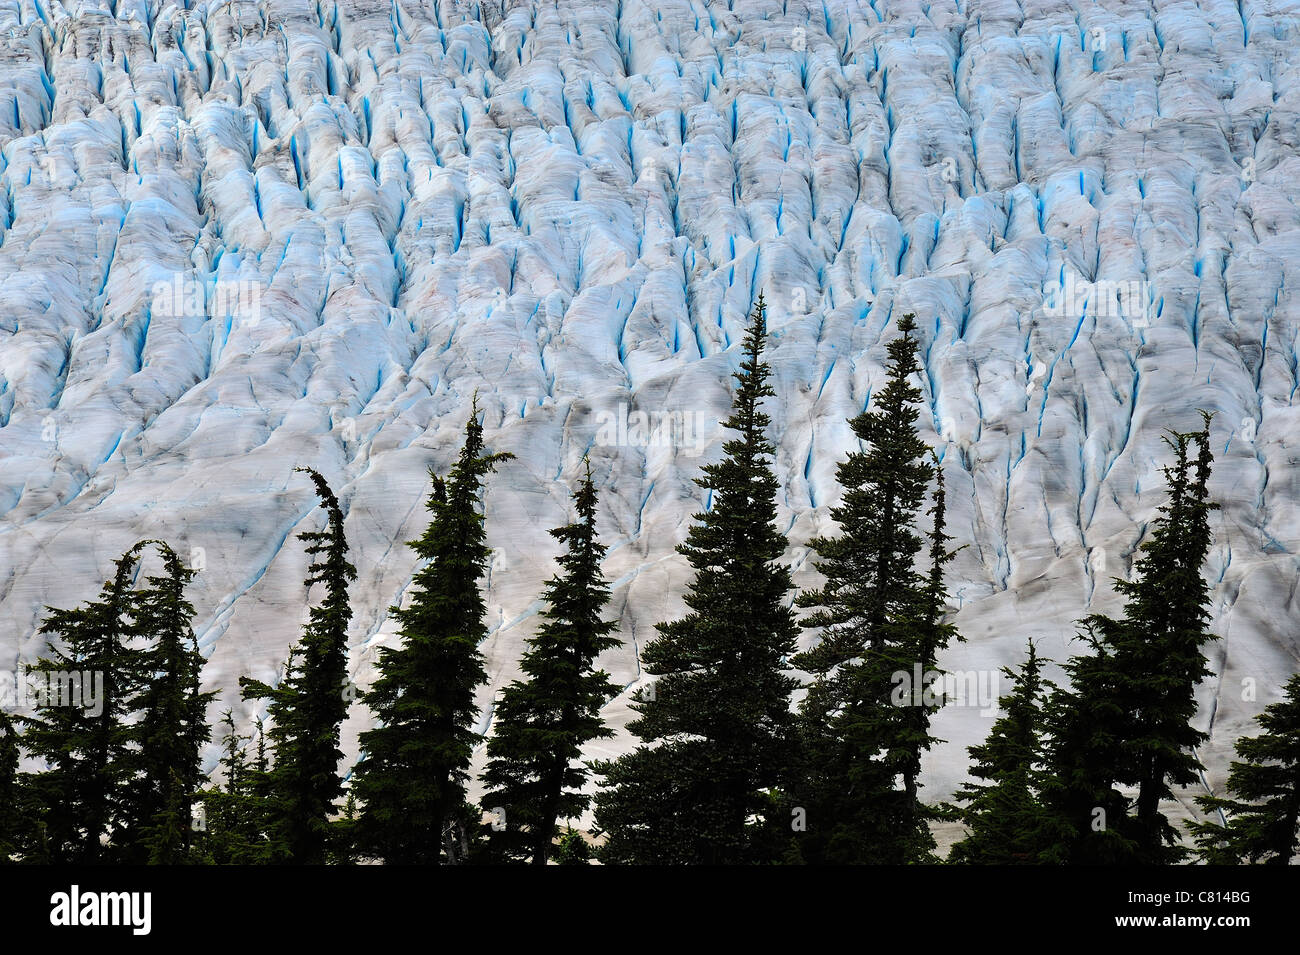 A close up image of the blue ice of the Salmon Glacier near Stewart British Columbia Canada Stock Photo